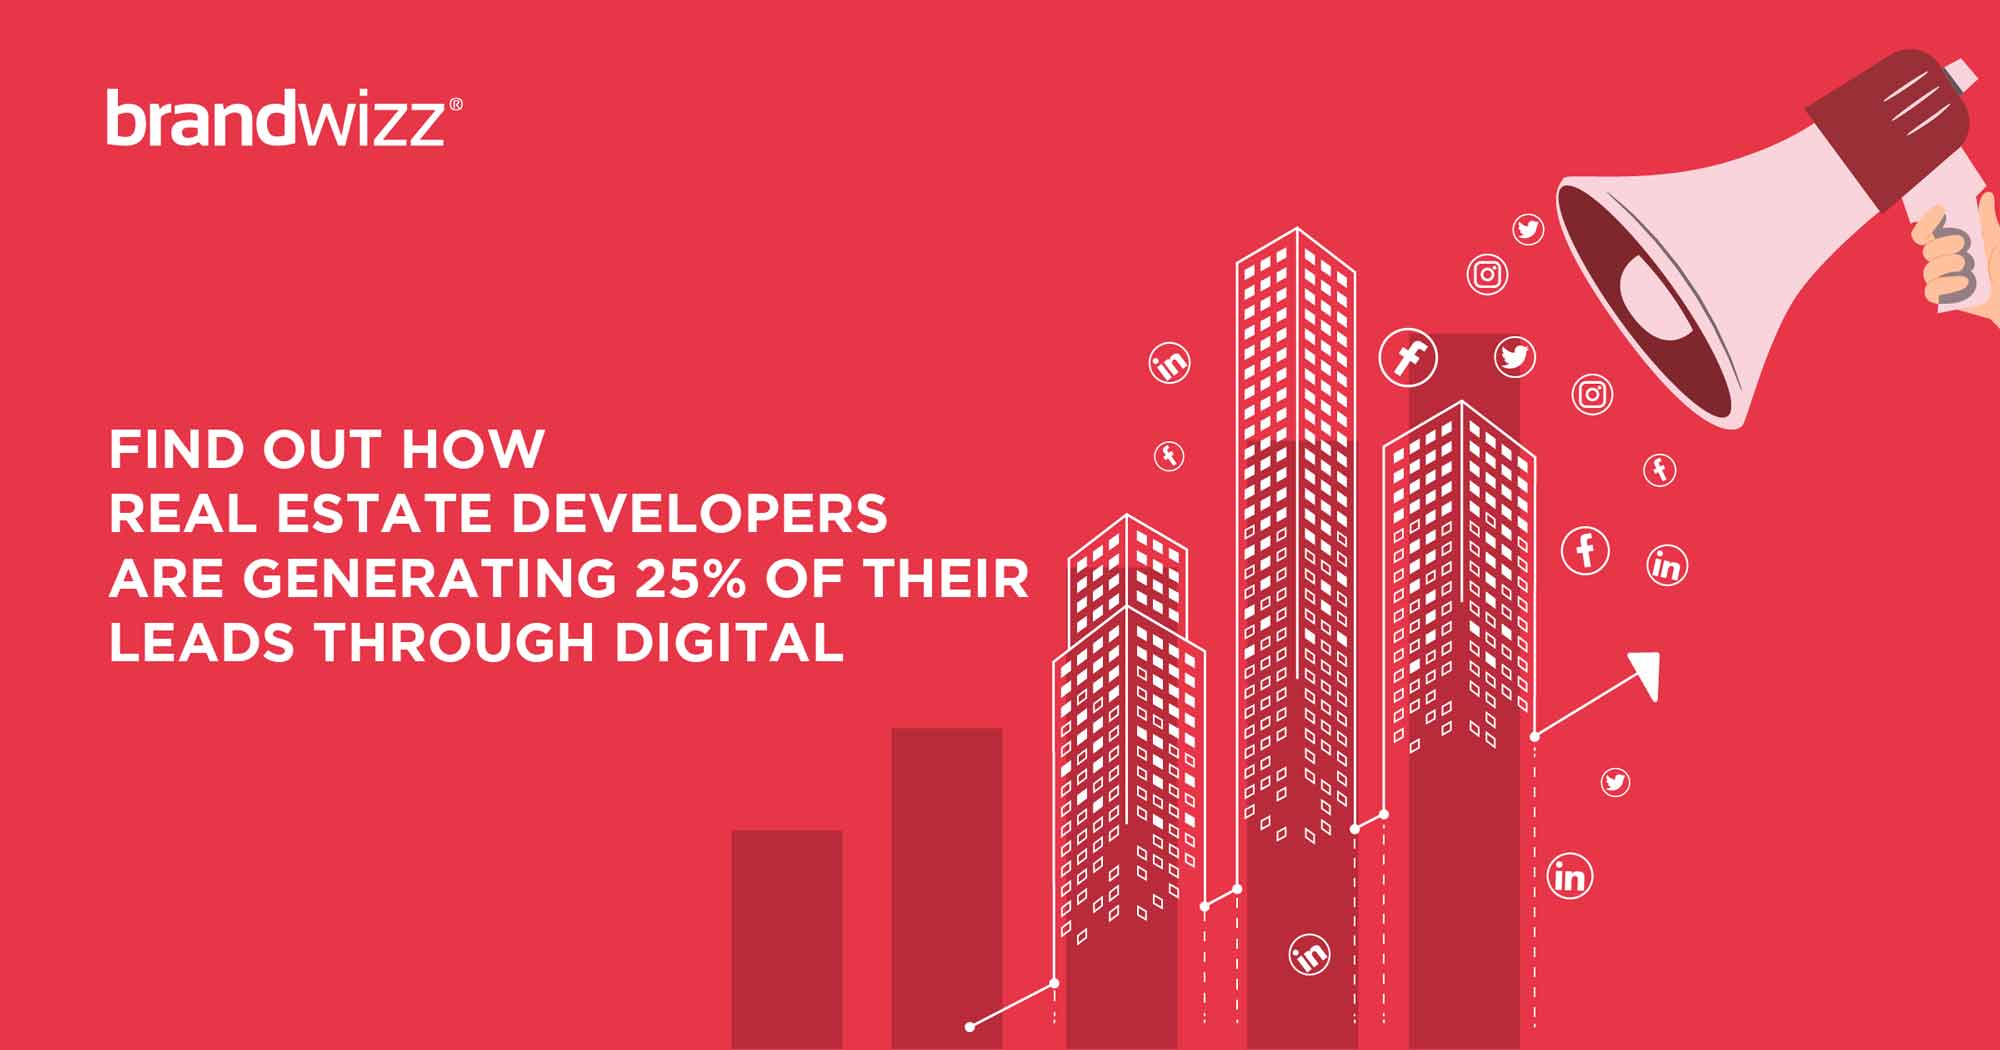 Find Out How Real Estate Developers Are Generating 25% Of Their Leads Through Digital